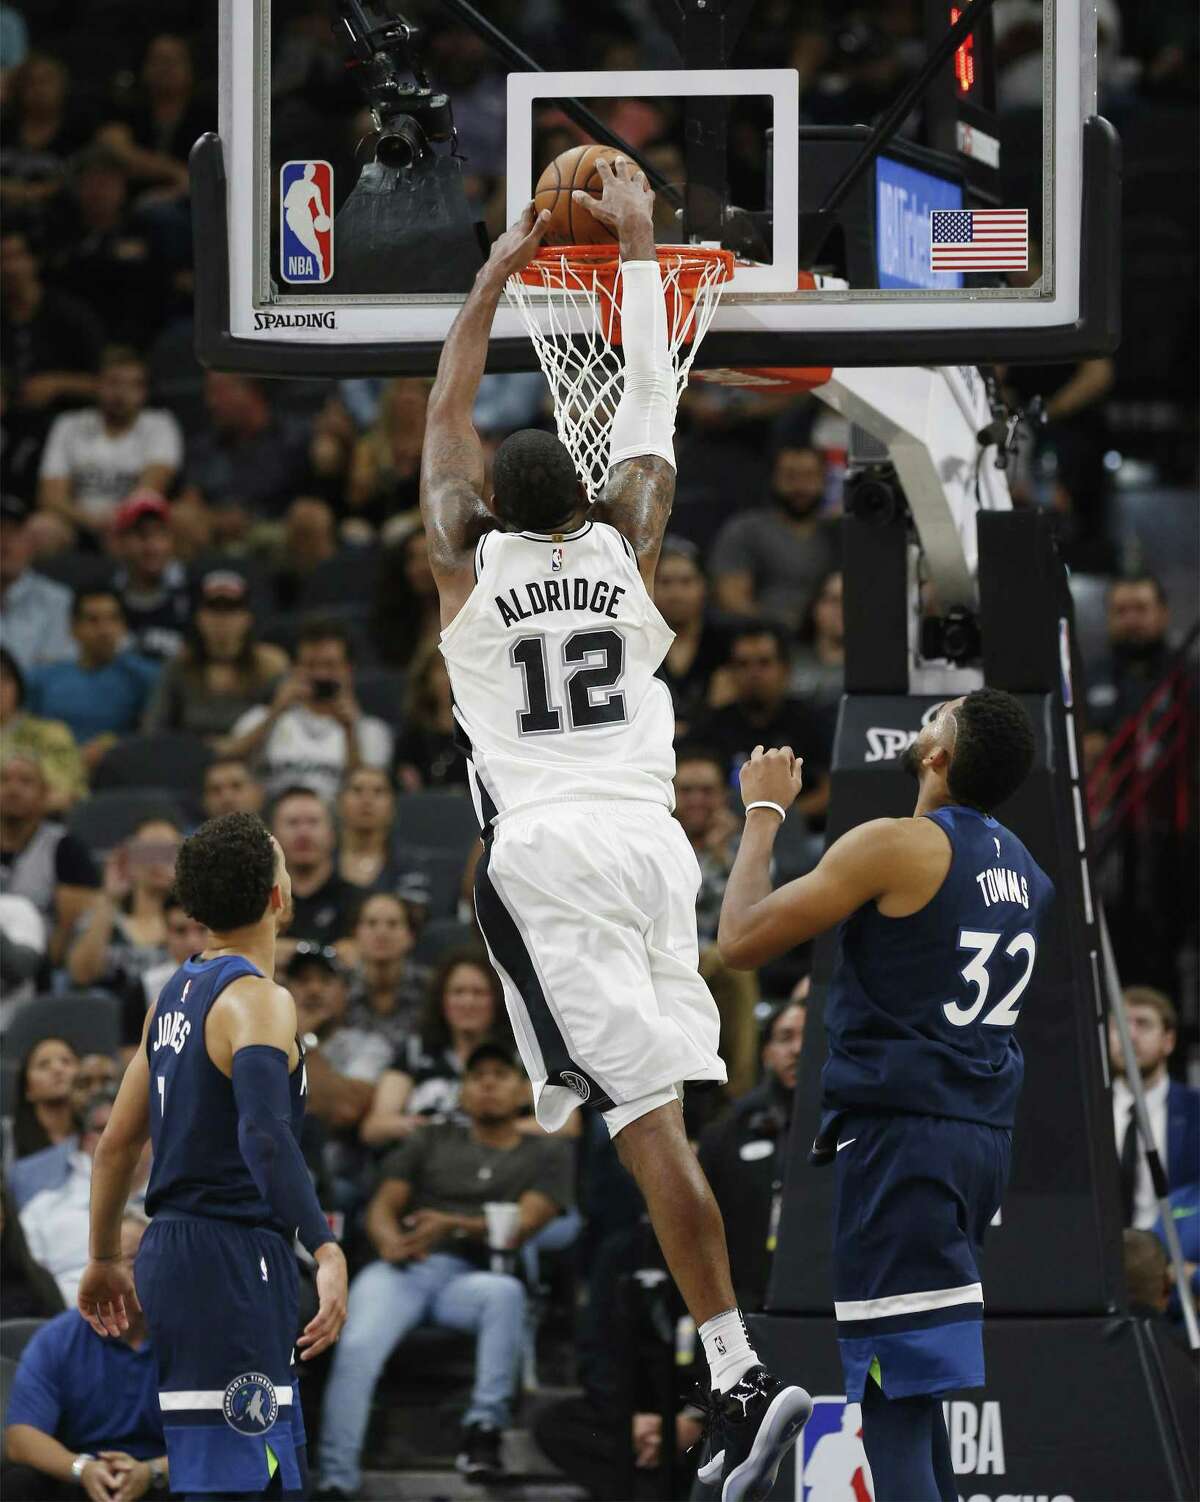 Spurs' LaMarcus Aldridge (12) dunks against Minnesota Timberwolves' Karl-Anthony Towns (32) and Tyus Jones (01) in the fourth at the AT&T Center on Wednesday, Oct. 18, 2017. Spurs defeated the T'Wolves, 107-99. (Kin Man Hui/San Antonio Express-News)